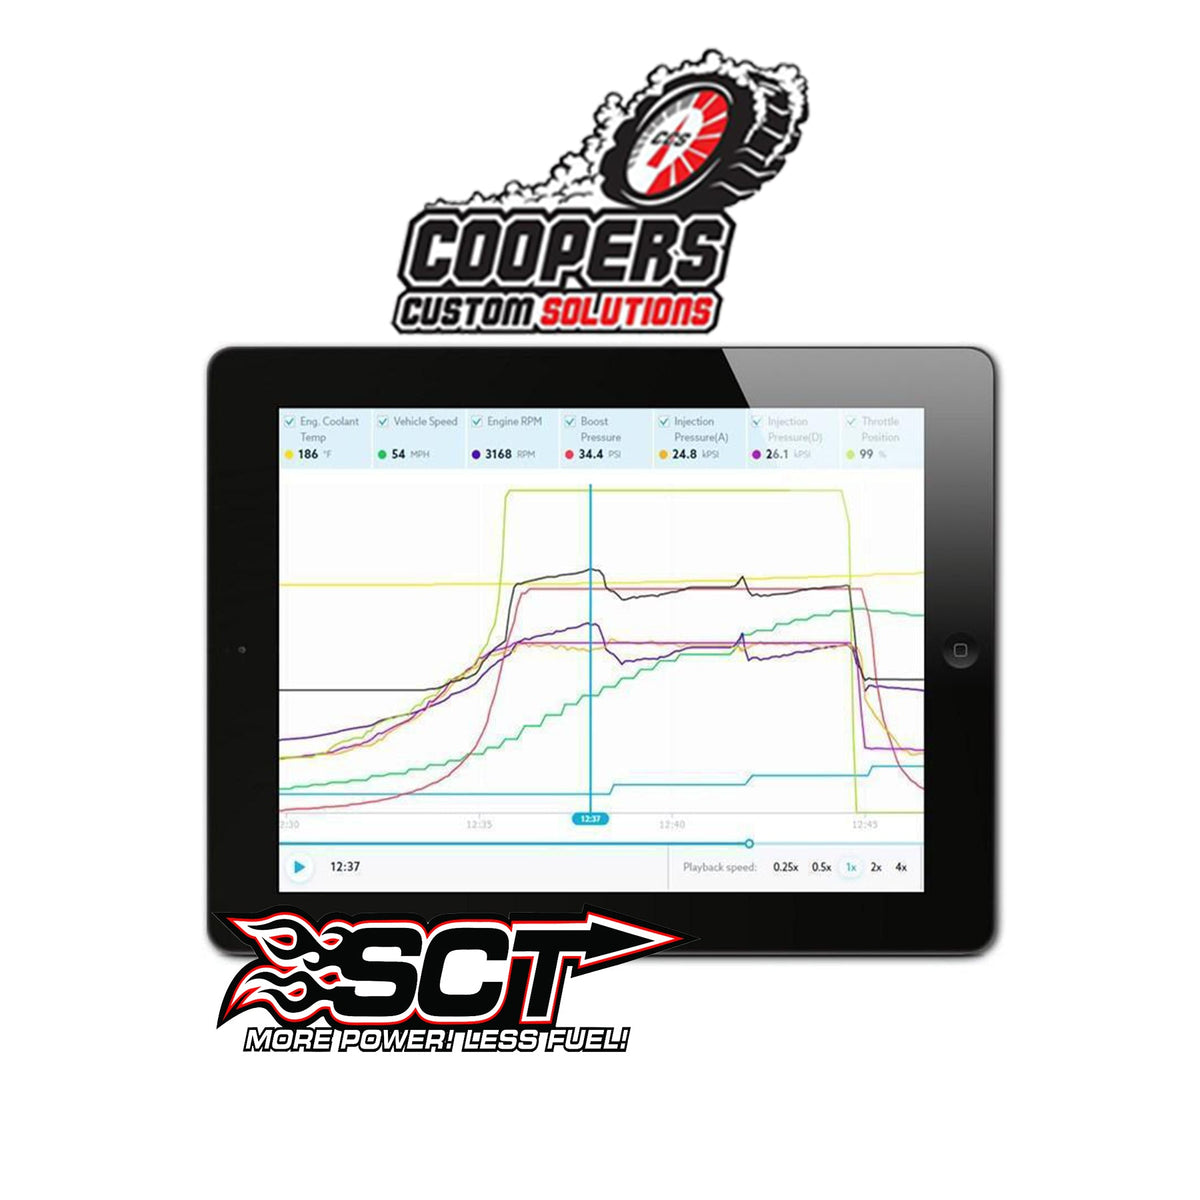 2013-2019 Powerstroke CCS SCT Custom Tune Files (13-19-CCS-SCT)-Tune Files-Coopers Custom Solutions-Dirty Diesel Customs